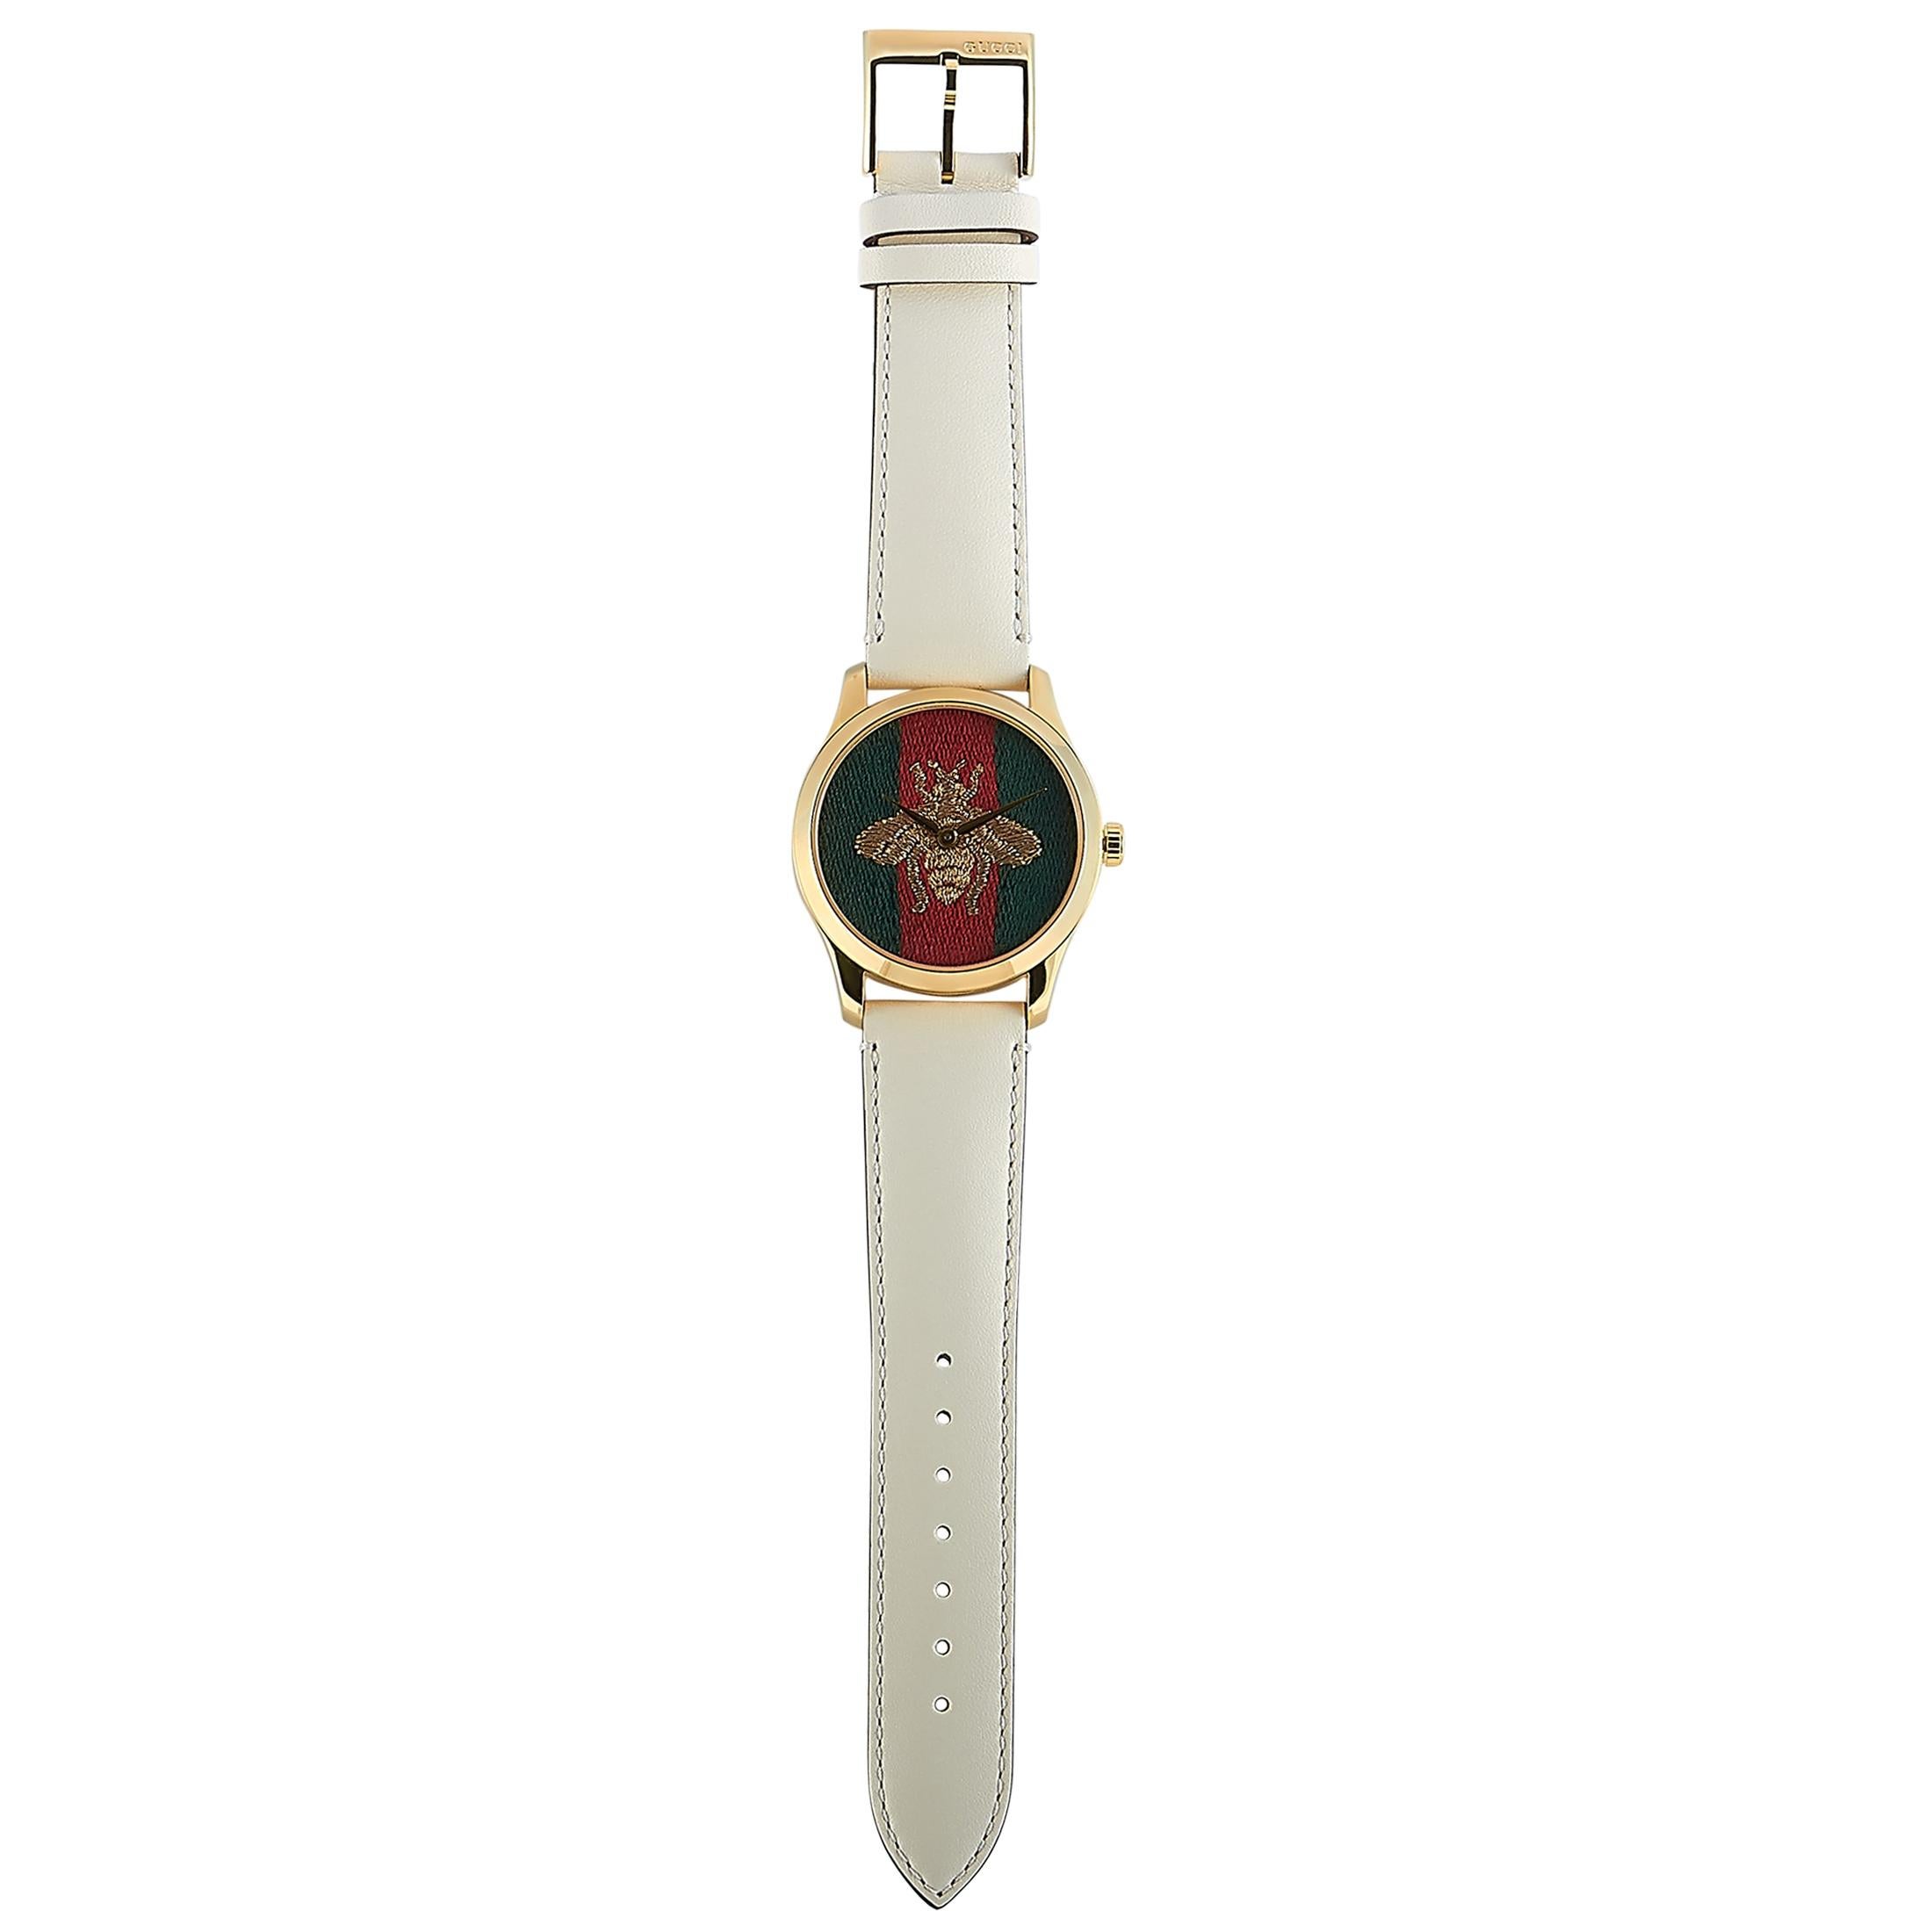 The Gucci G-Timeless, reference number YA1264128, is a member of the exceptional “G-Timeless” collection.

The watch is presented with a 38 mm yellow gold PVD-plated stainless steel case that is water-resistant to 50 meters. The case is mounted onto